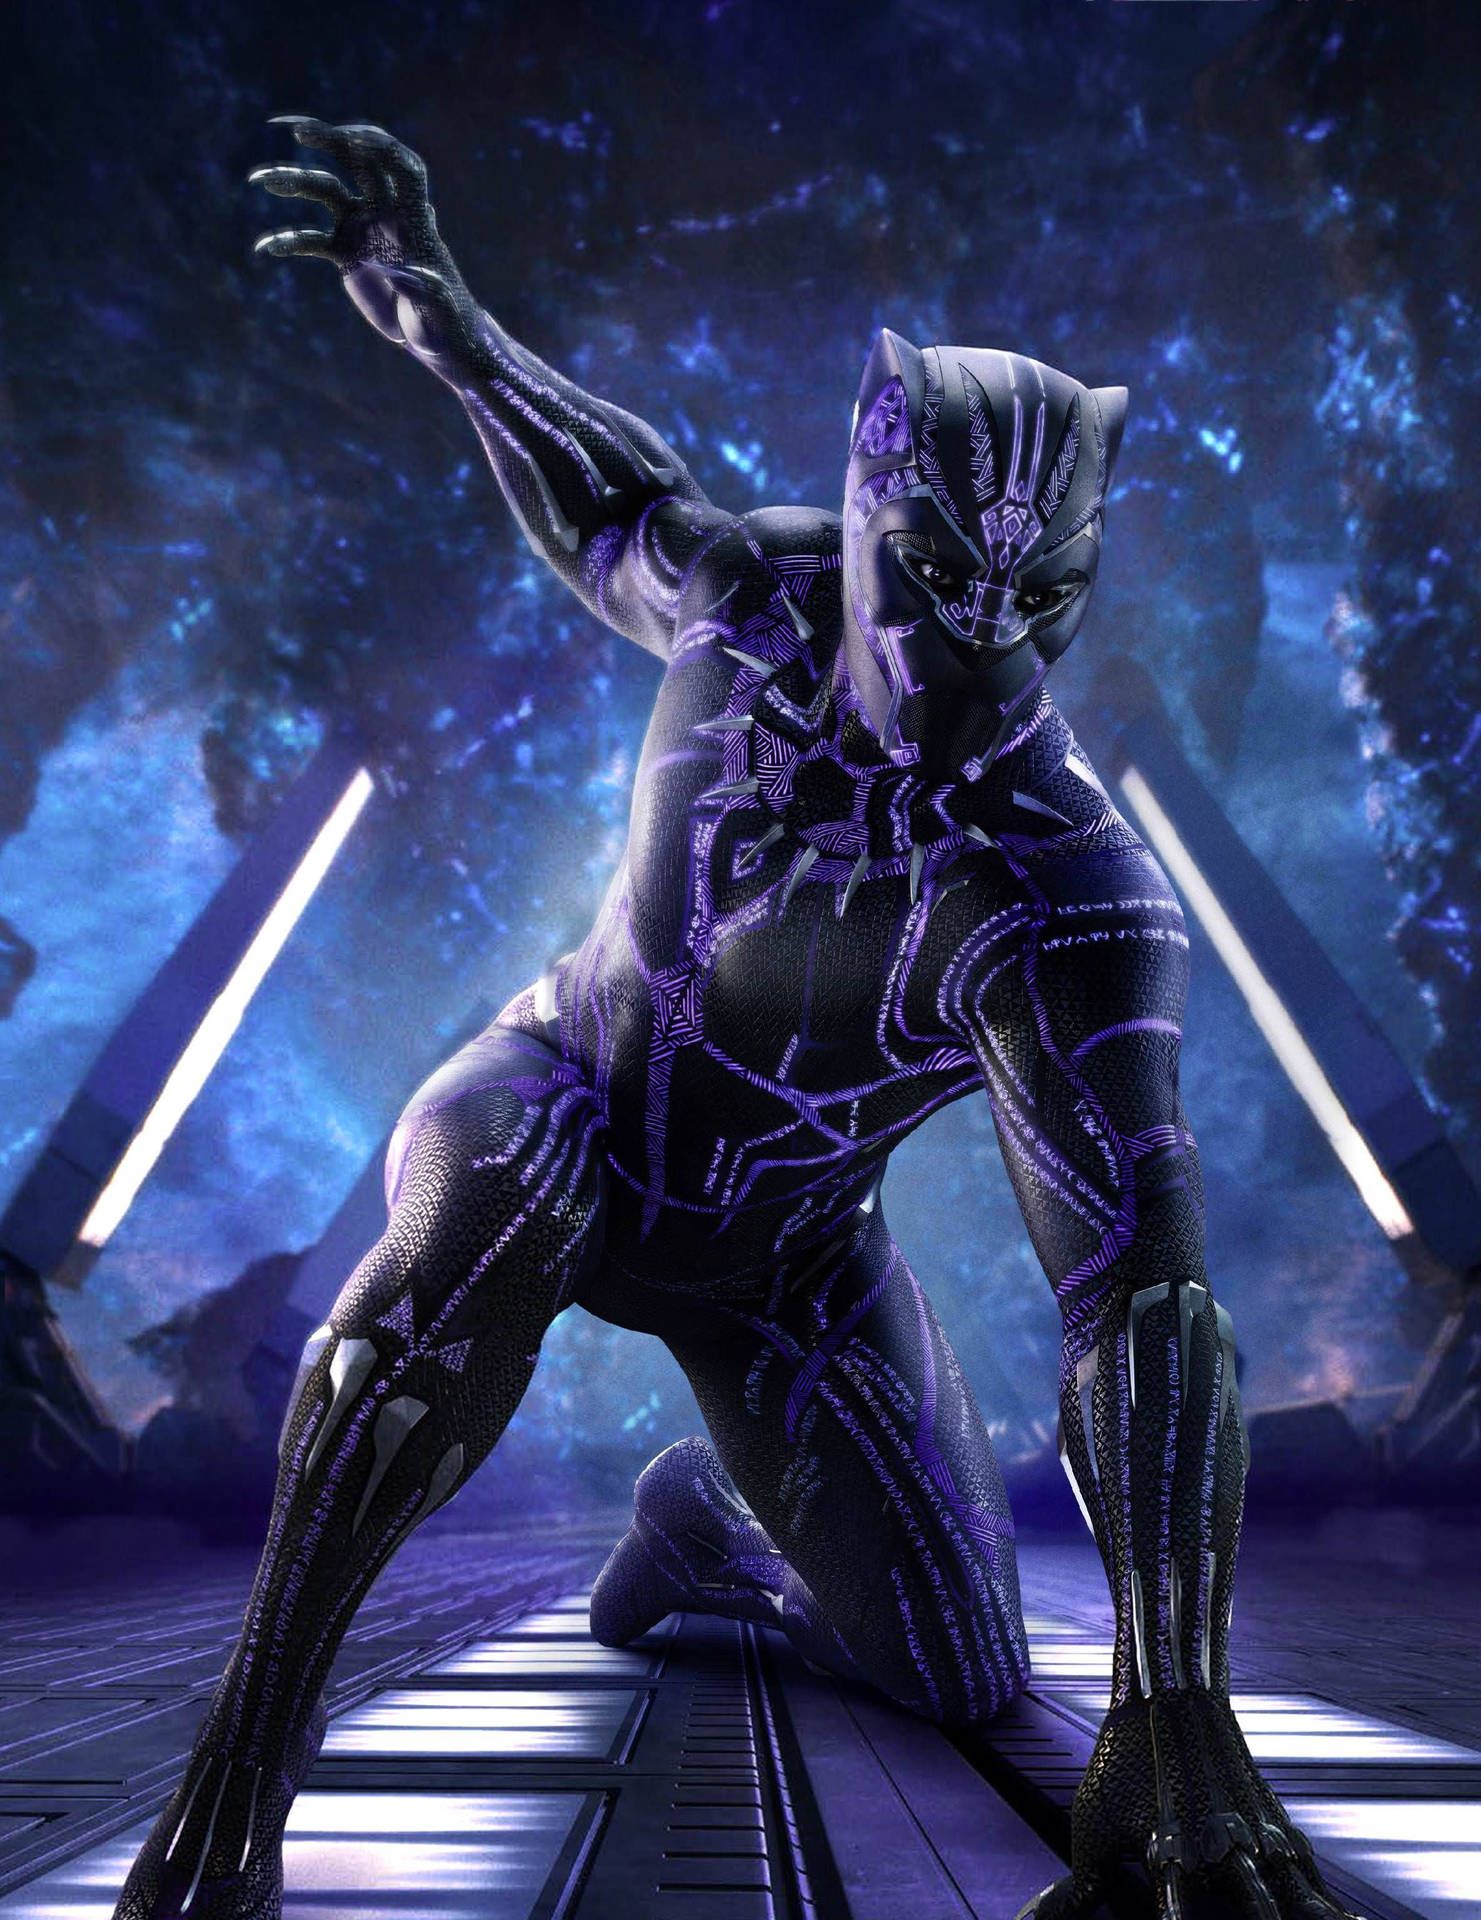  Black Panther Hintergrundbild 1481x1920. Download Get Ready to Experience Wakanda with Black Panther Wallpaper